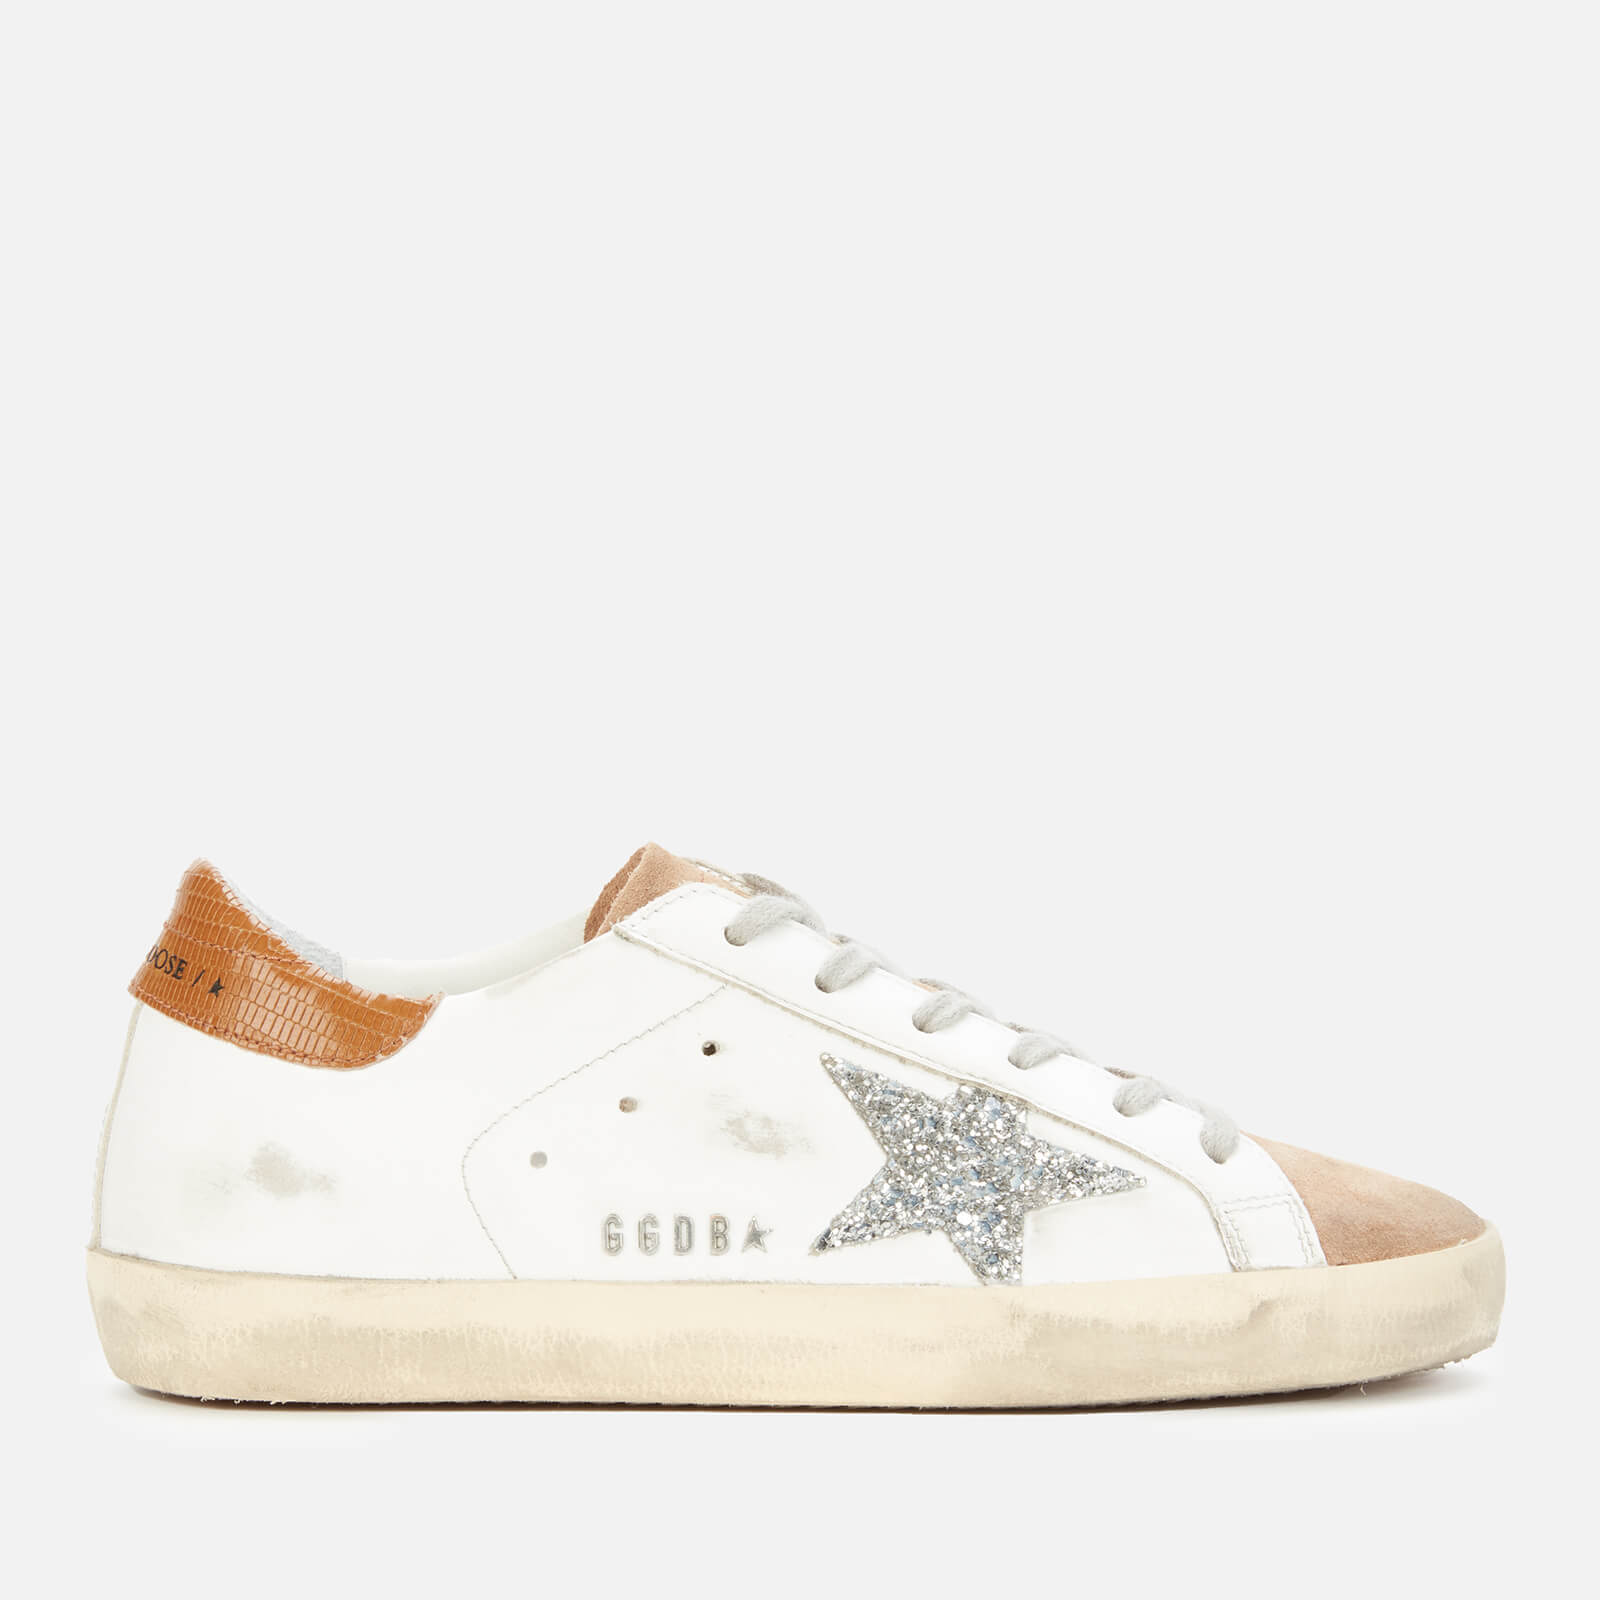 Golden Goose Deluxe Brand Women's Superstar Leather Trainers - White/Tobacco/Silver/Taupe - UK 3